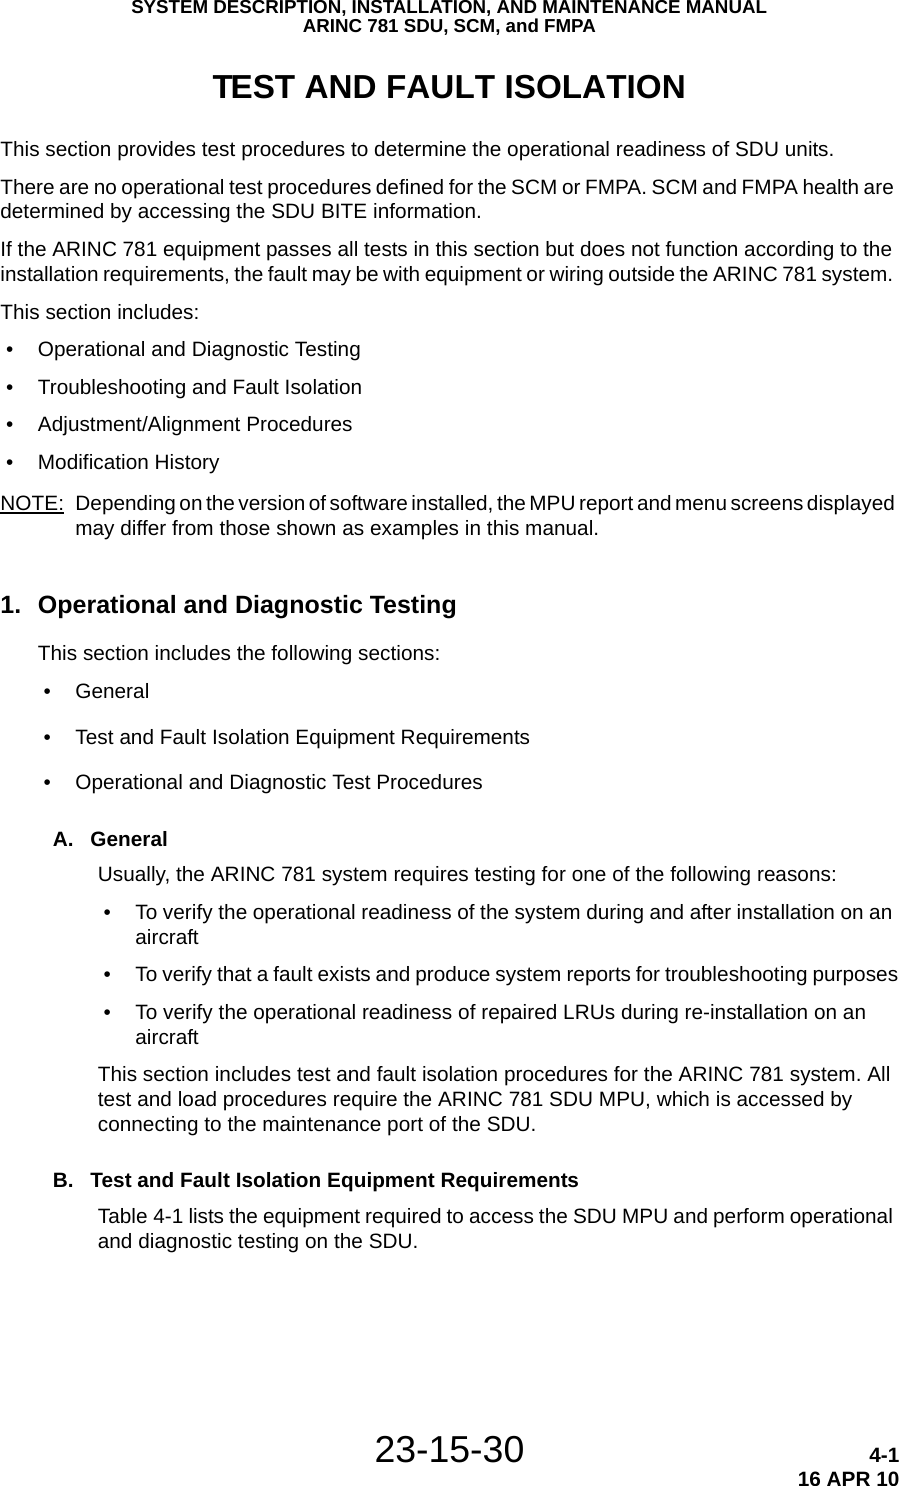 SYSTEM DESCRIPTION, INSTALLATION, AND MAINTENANCE MANUALARINC 781 SDU, SCM, and FMPA23-15-30 4-116 APR 10TEST AND FAULT ISOLATIONThis section provides test procedures to determine the operational readiness of SDU units. There are no operational test procedures defined for the SCM or FMPA. SCM and FMPA health are determined by accessing the SDU BITE information.If the ARINC 781 equipment passes all tests in this section but does not function according to the installation requirements, the fault may be with equipment or wiring outside the ARINC 781 system. This section includes: • Operational and Diagnostic Testing • Troubleshooting and Fault Isolation • Adjustment/Alignment Procedures • Modification History NOTE: Depending on the version of software installed, the MPU report and menu screens displayed may differ from those shown as examples in this manual.1. Operational and Diagnostic TestingThis section includes the following sections: • General • Test and Fault Isolation Equipment Requirements • Operational and Diagnostic Test ProceduresA. GeneralUsually, the ARINC 781 system requires testing for one of the following reasons: • To verify the operational readiness of the system during and after installation on an aircraft • To verify that a fault exists and produce system reports for troubleshooting purposes • To verify the operational readiness of repaired LRUs during re-installation on an aircraftThis section includes test and fault isolation procedures for the ARINC 781 system. All test and load procedures require the ARINC 781 SDU MPU, which is accessed by connecting to the maintenance port of the SDU. B. Test and Fault Isolation Equipment RequirementsTable 4-1 lists the equipment required to access the SDU MPU and perform operational and diagnostic testing on the SDU. 